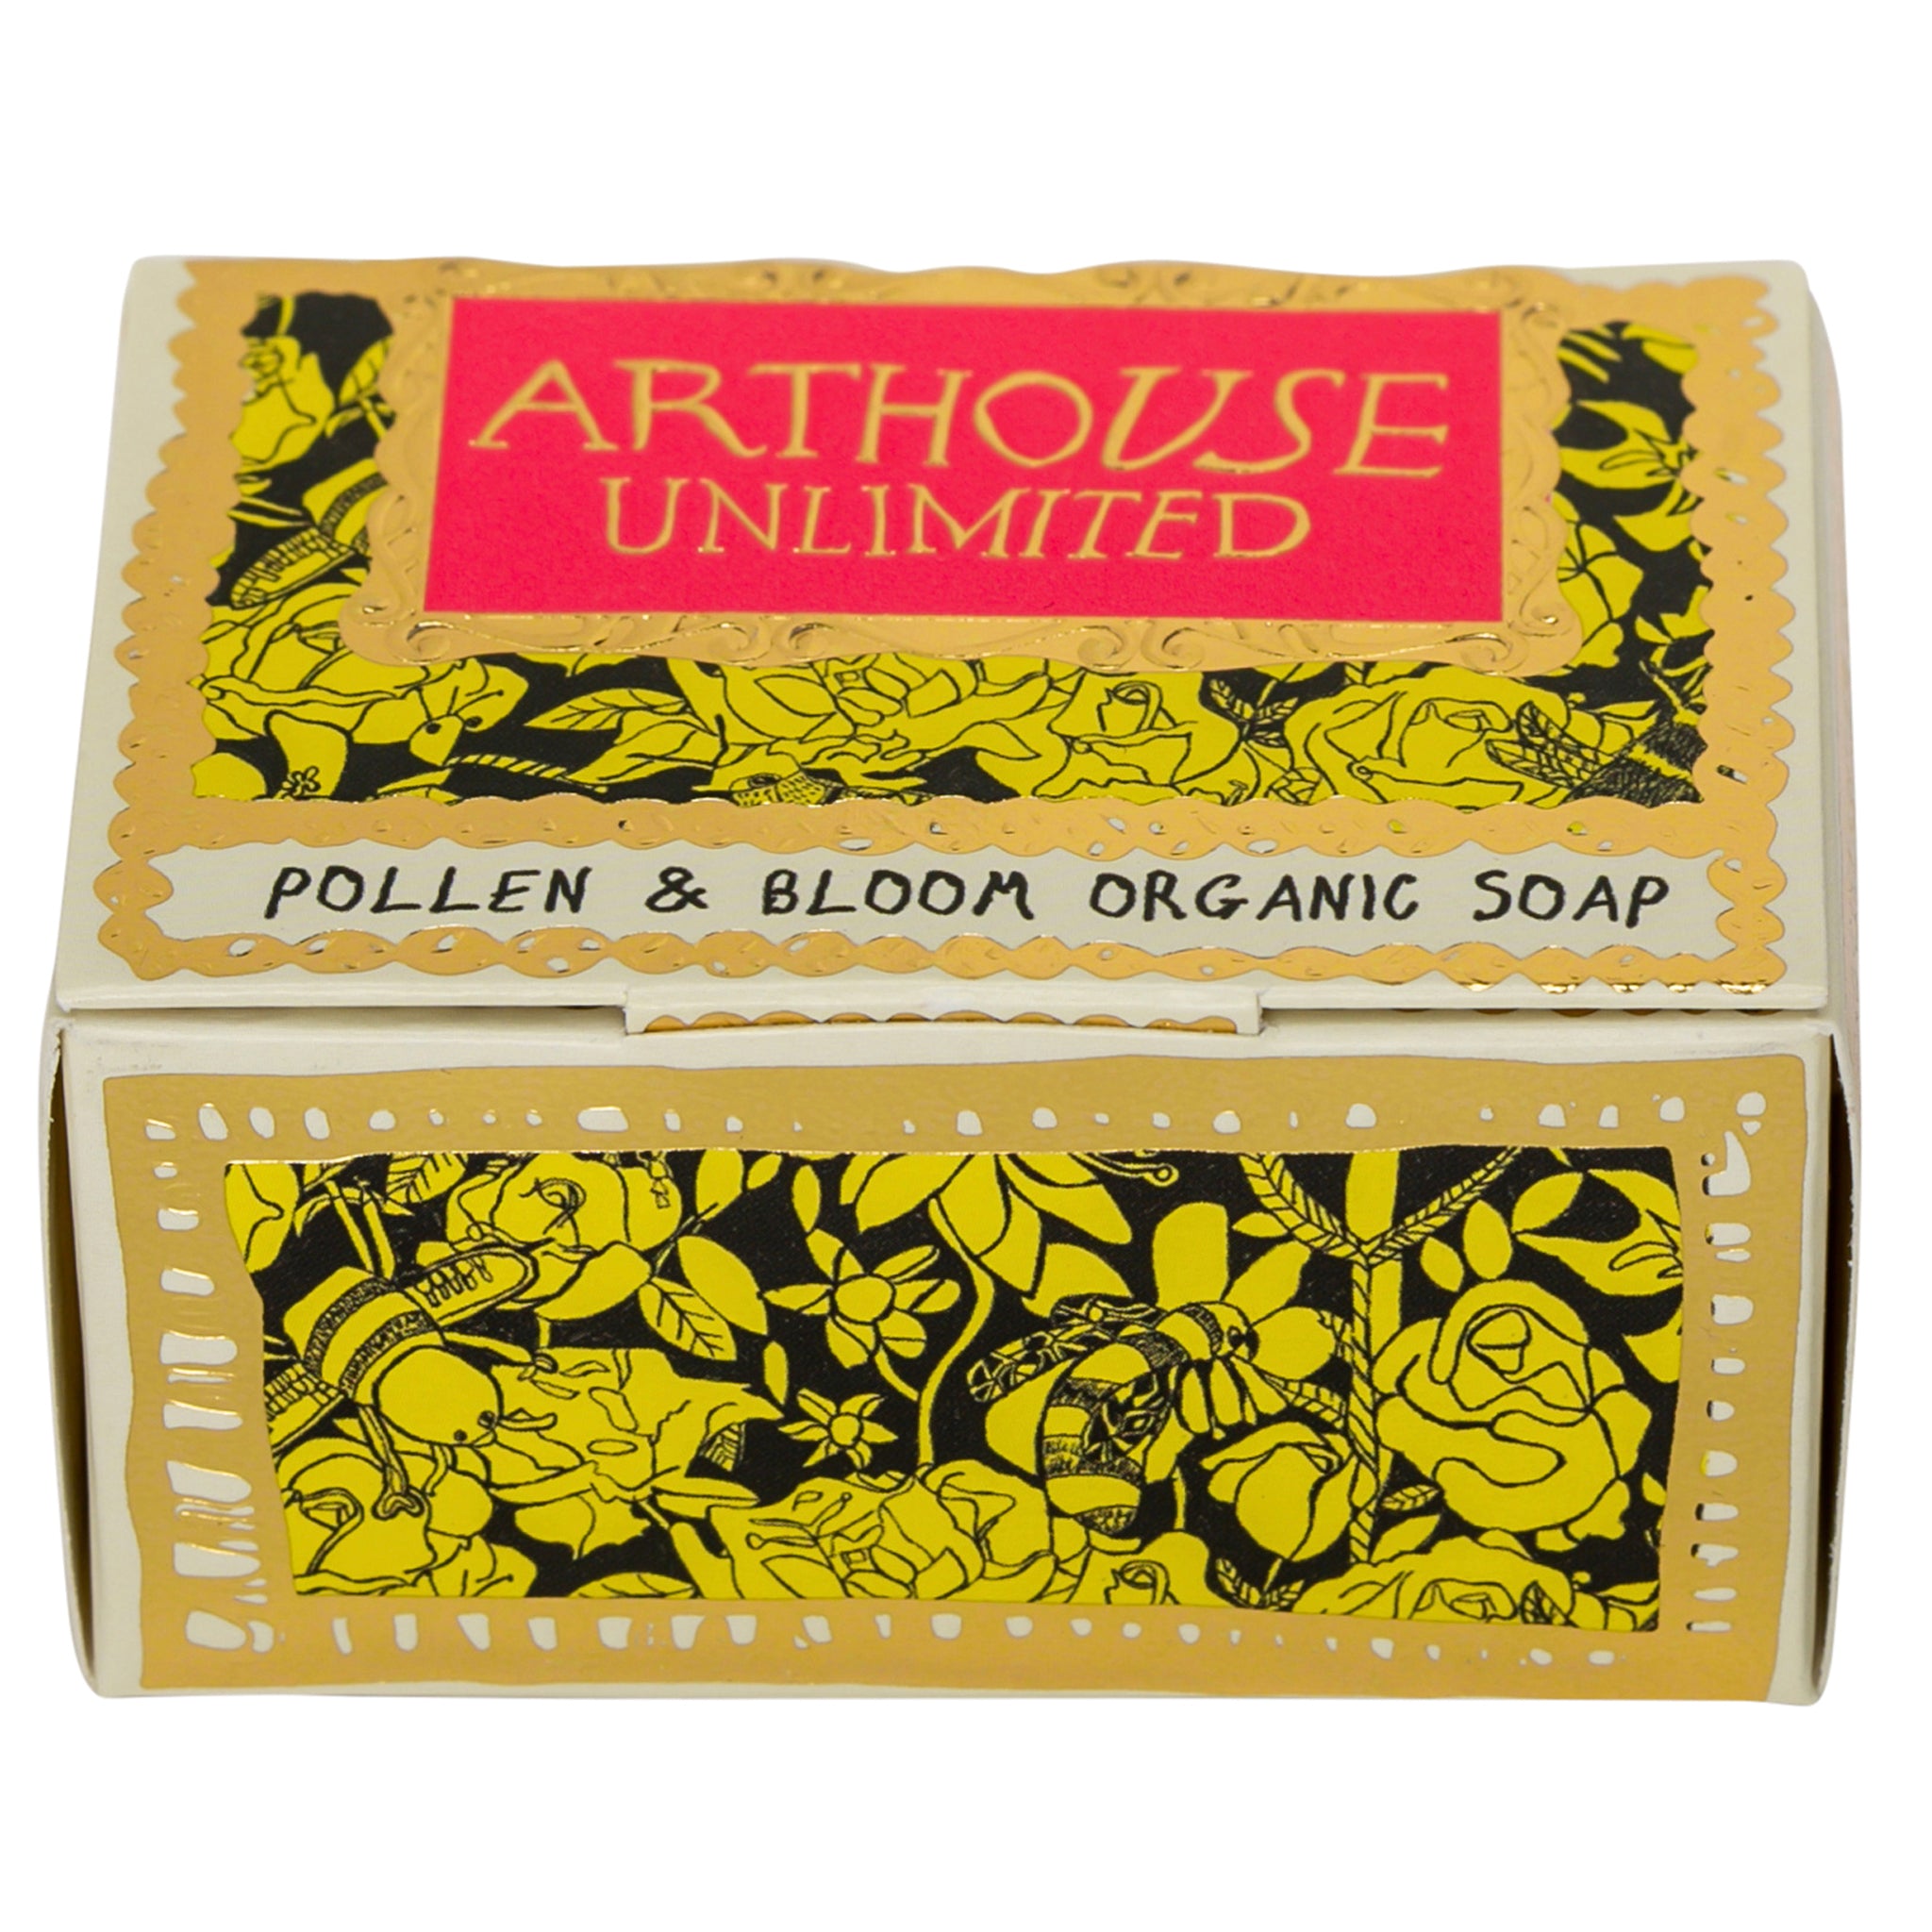 Bee Free, Triple Milled Organic Soap Slab in yellow, black and gold box